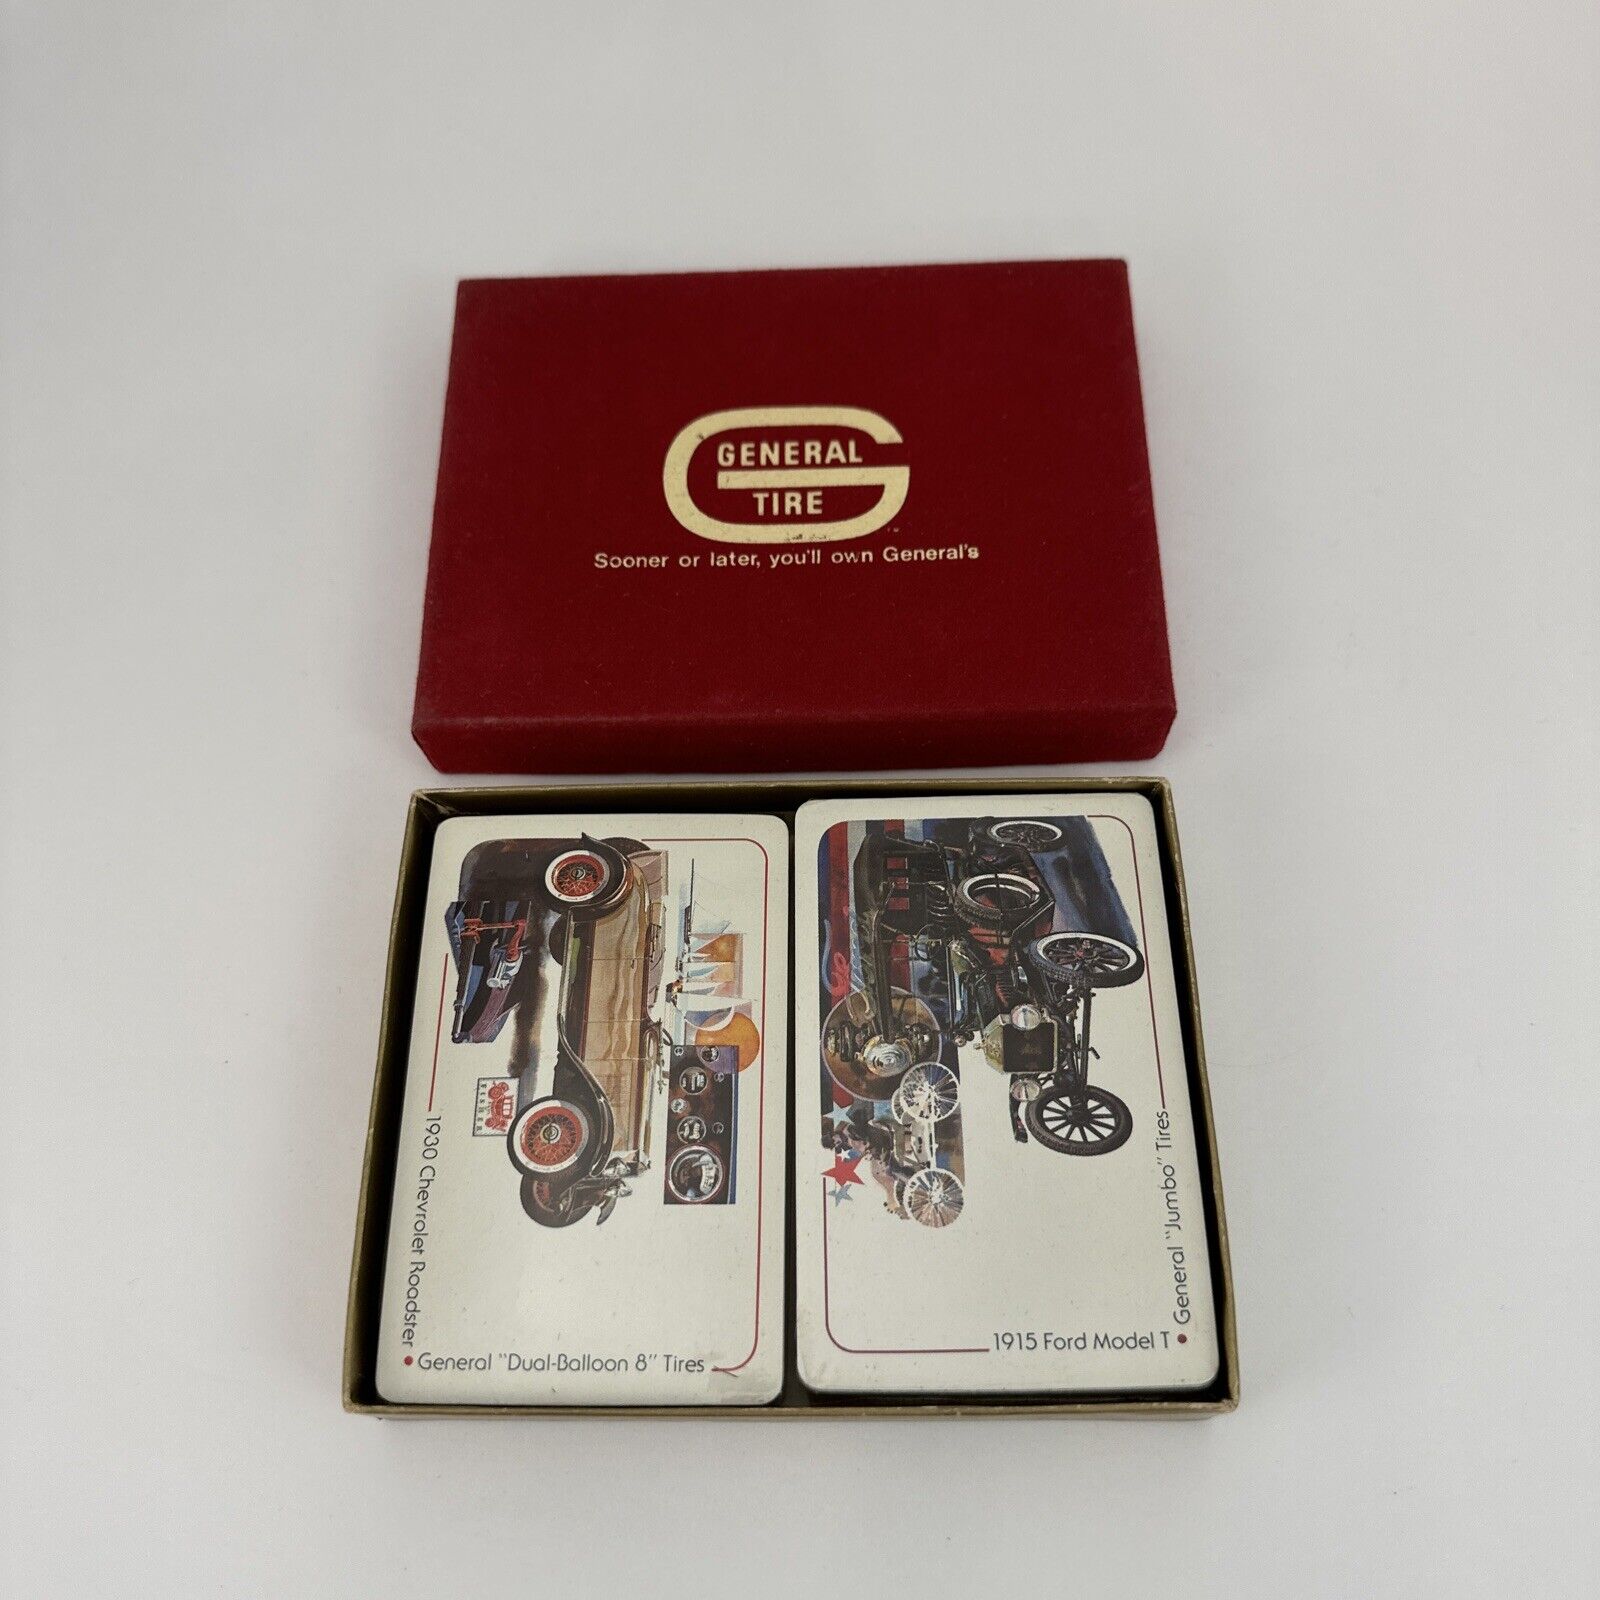 Vintage General Tire Collectible Playing Card Decks in Box Automobiles Cars